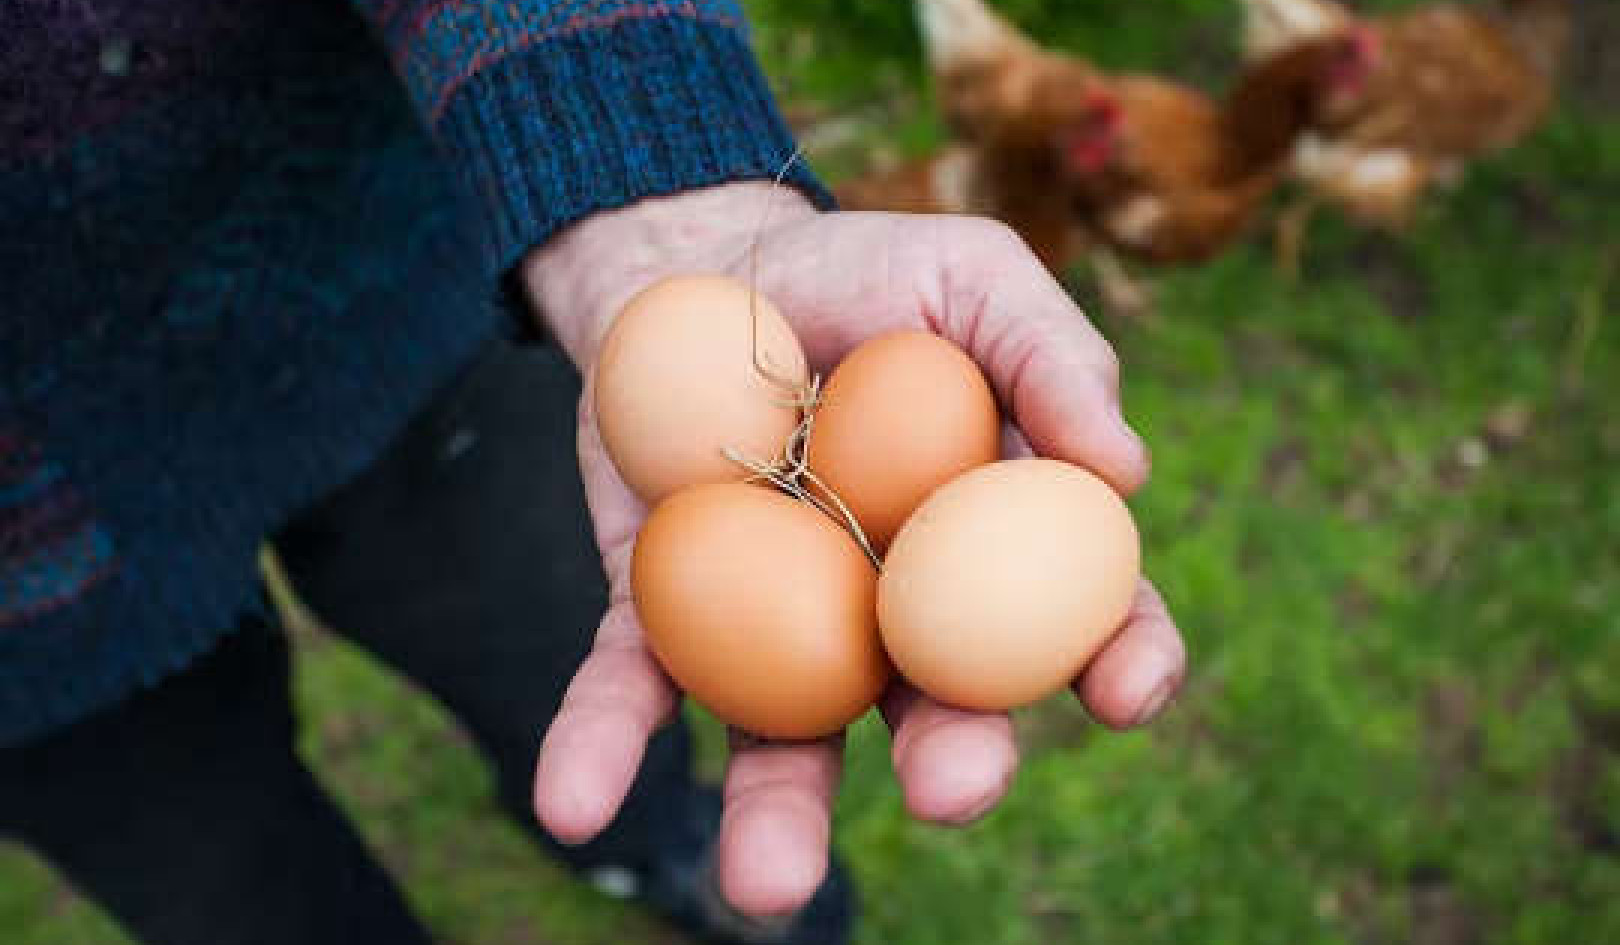 How Free-Range Eggs Sold Customers A Lie